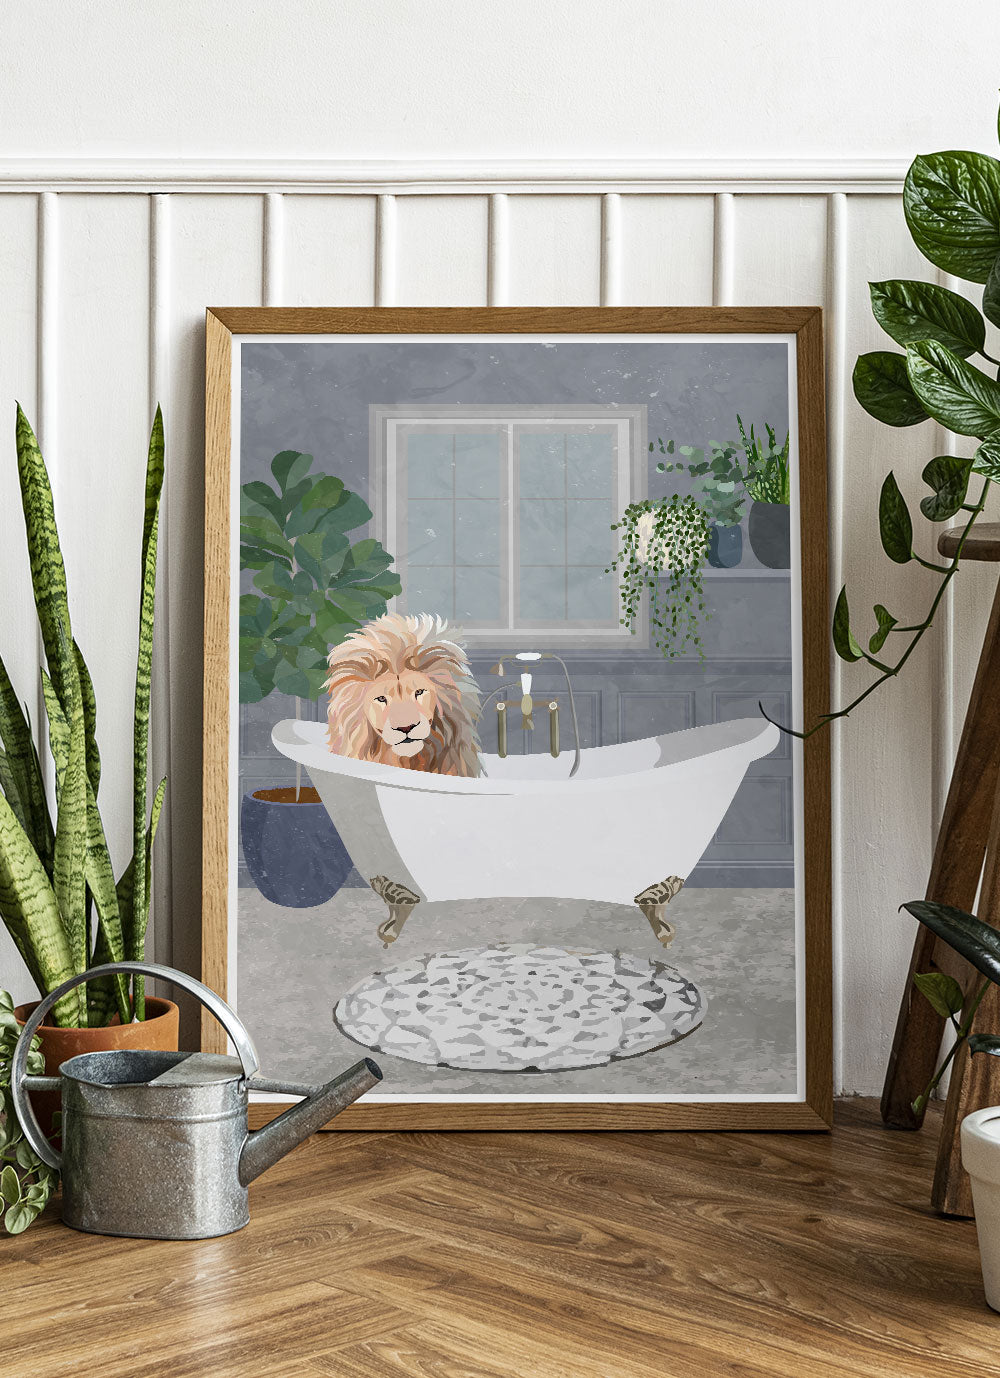 Lion in a Bath Art Print by Sarah Manovski in beautiful room with house plants